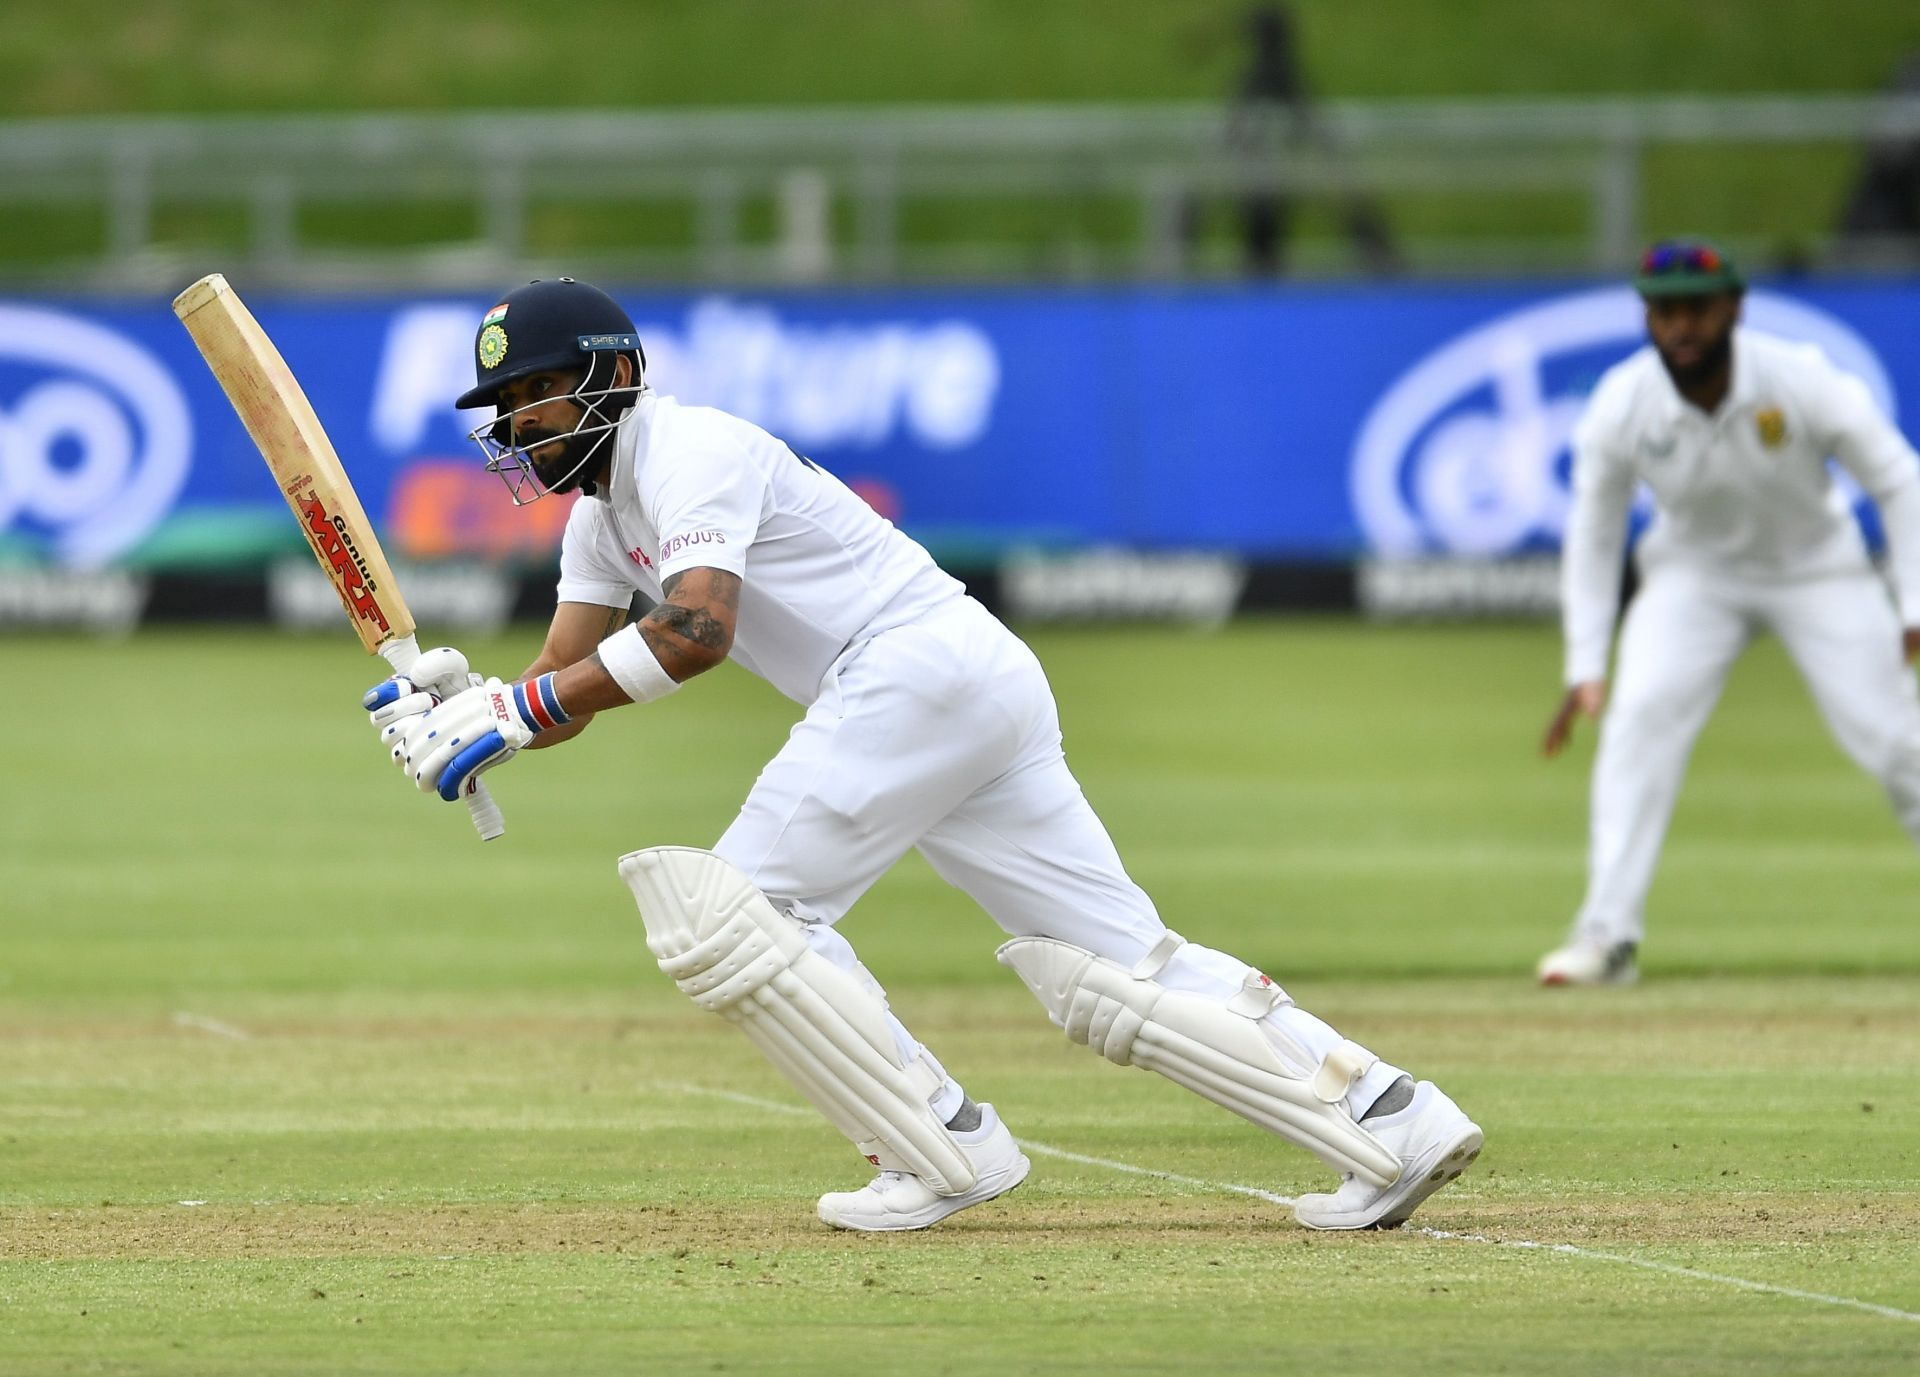 Virat Kohli played a dogged innings on Day 1 of the Cape Town Test